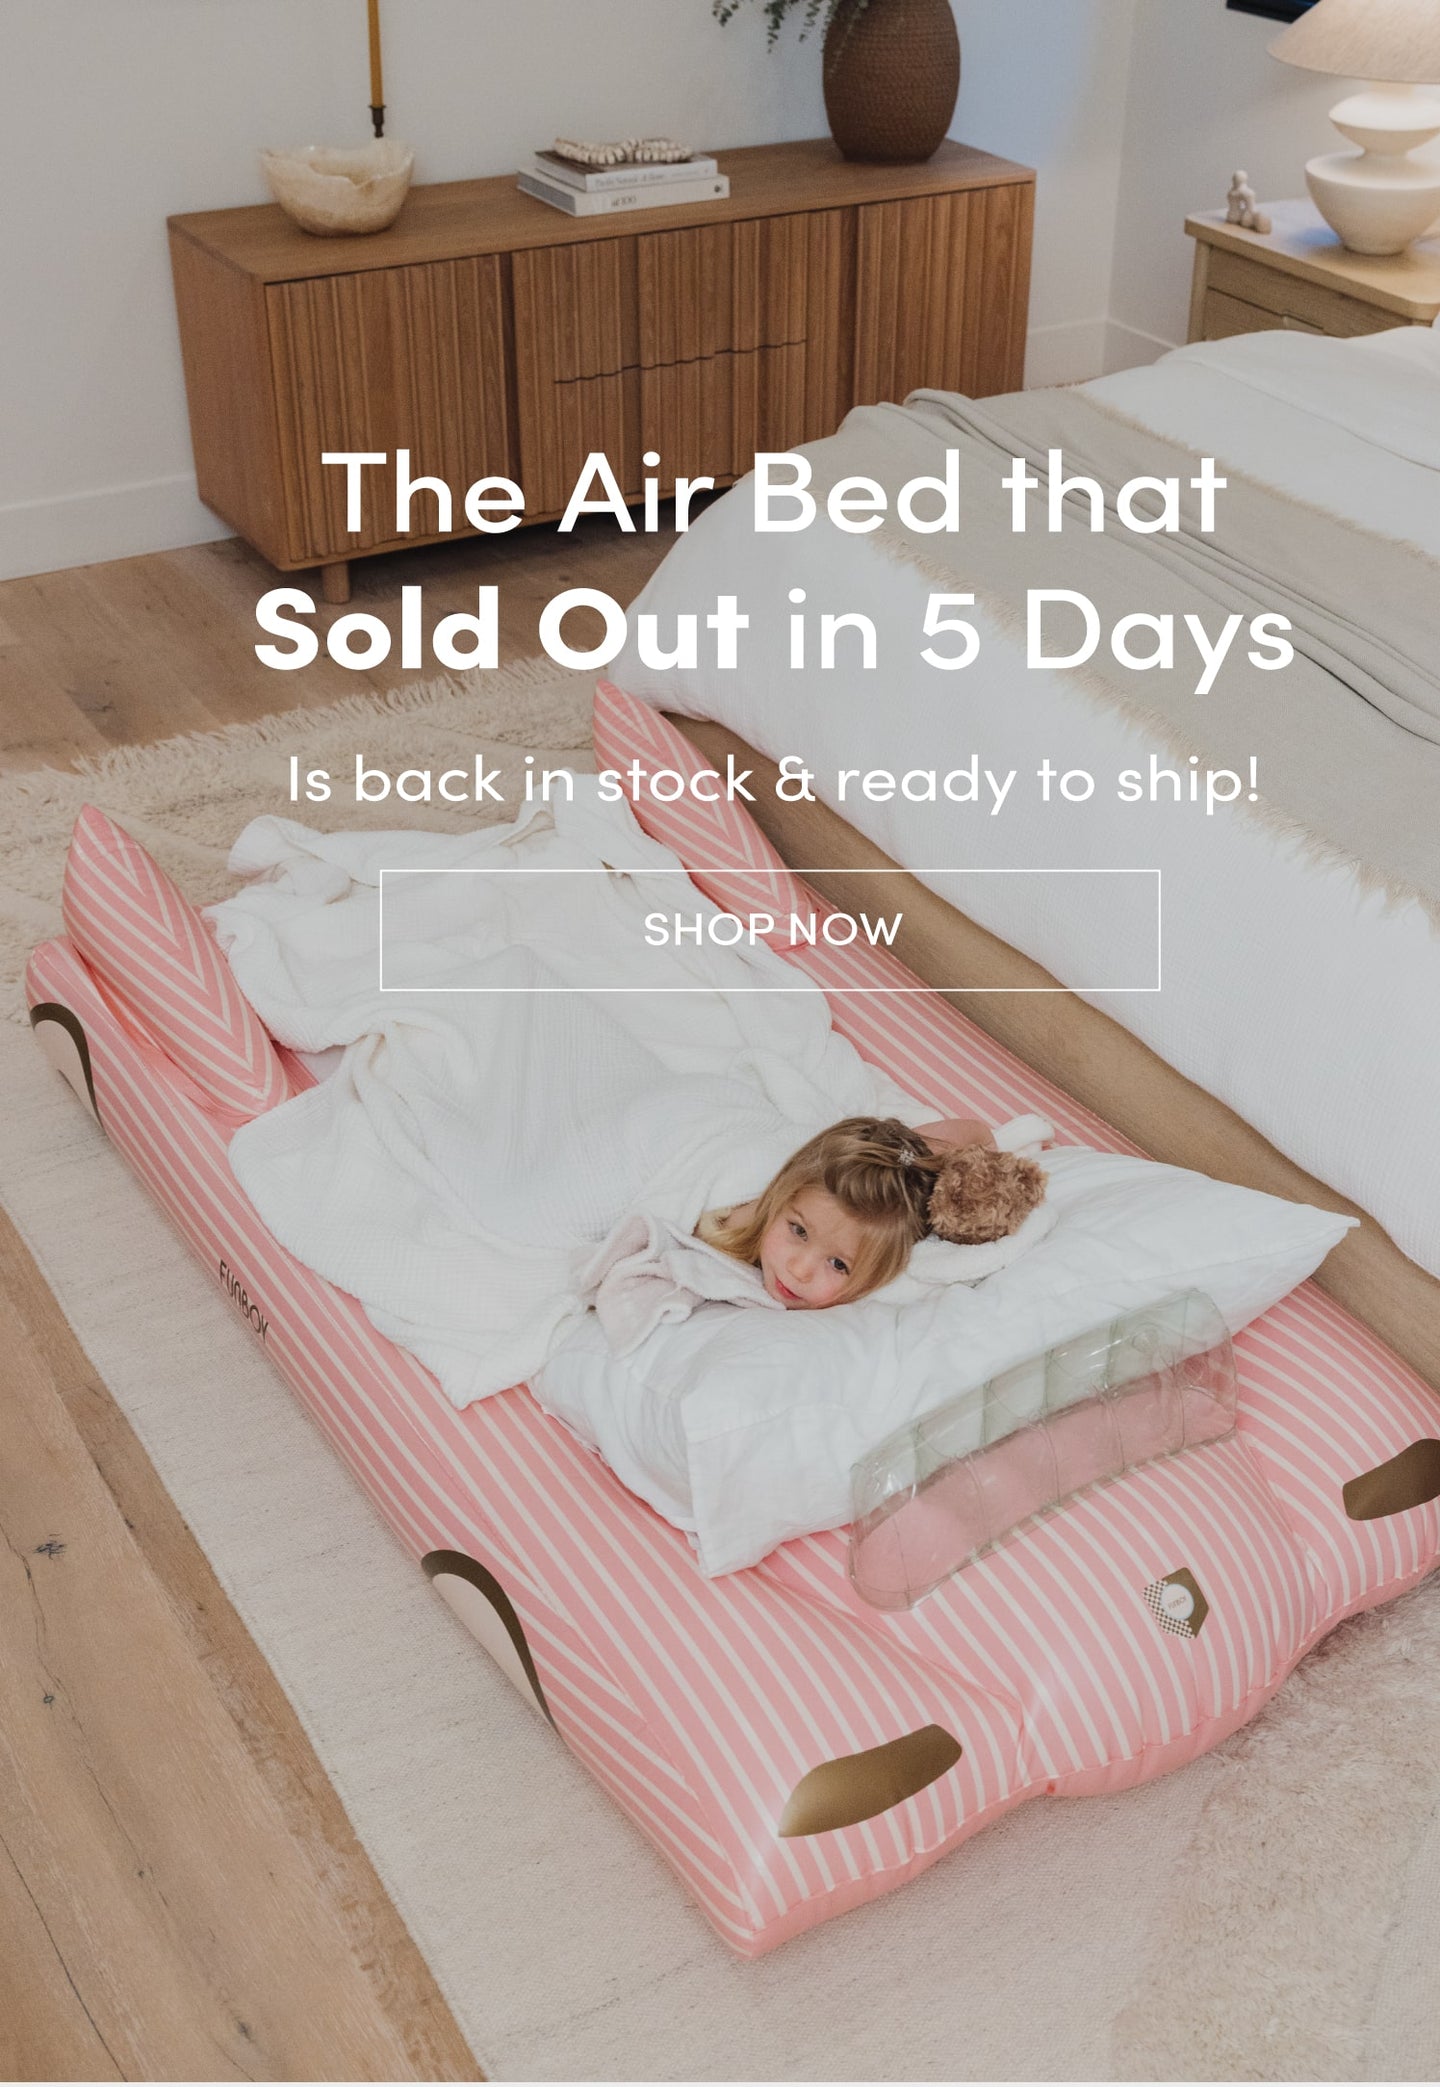 The Air Bed that Sold Out in 5 Days. Back in stock and ready to ship! Shop Now